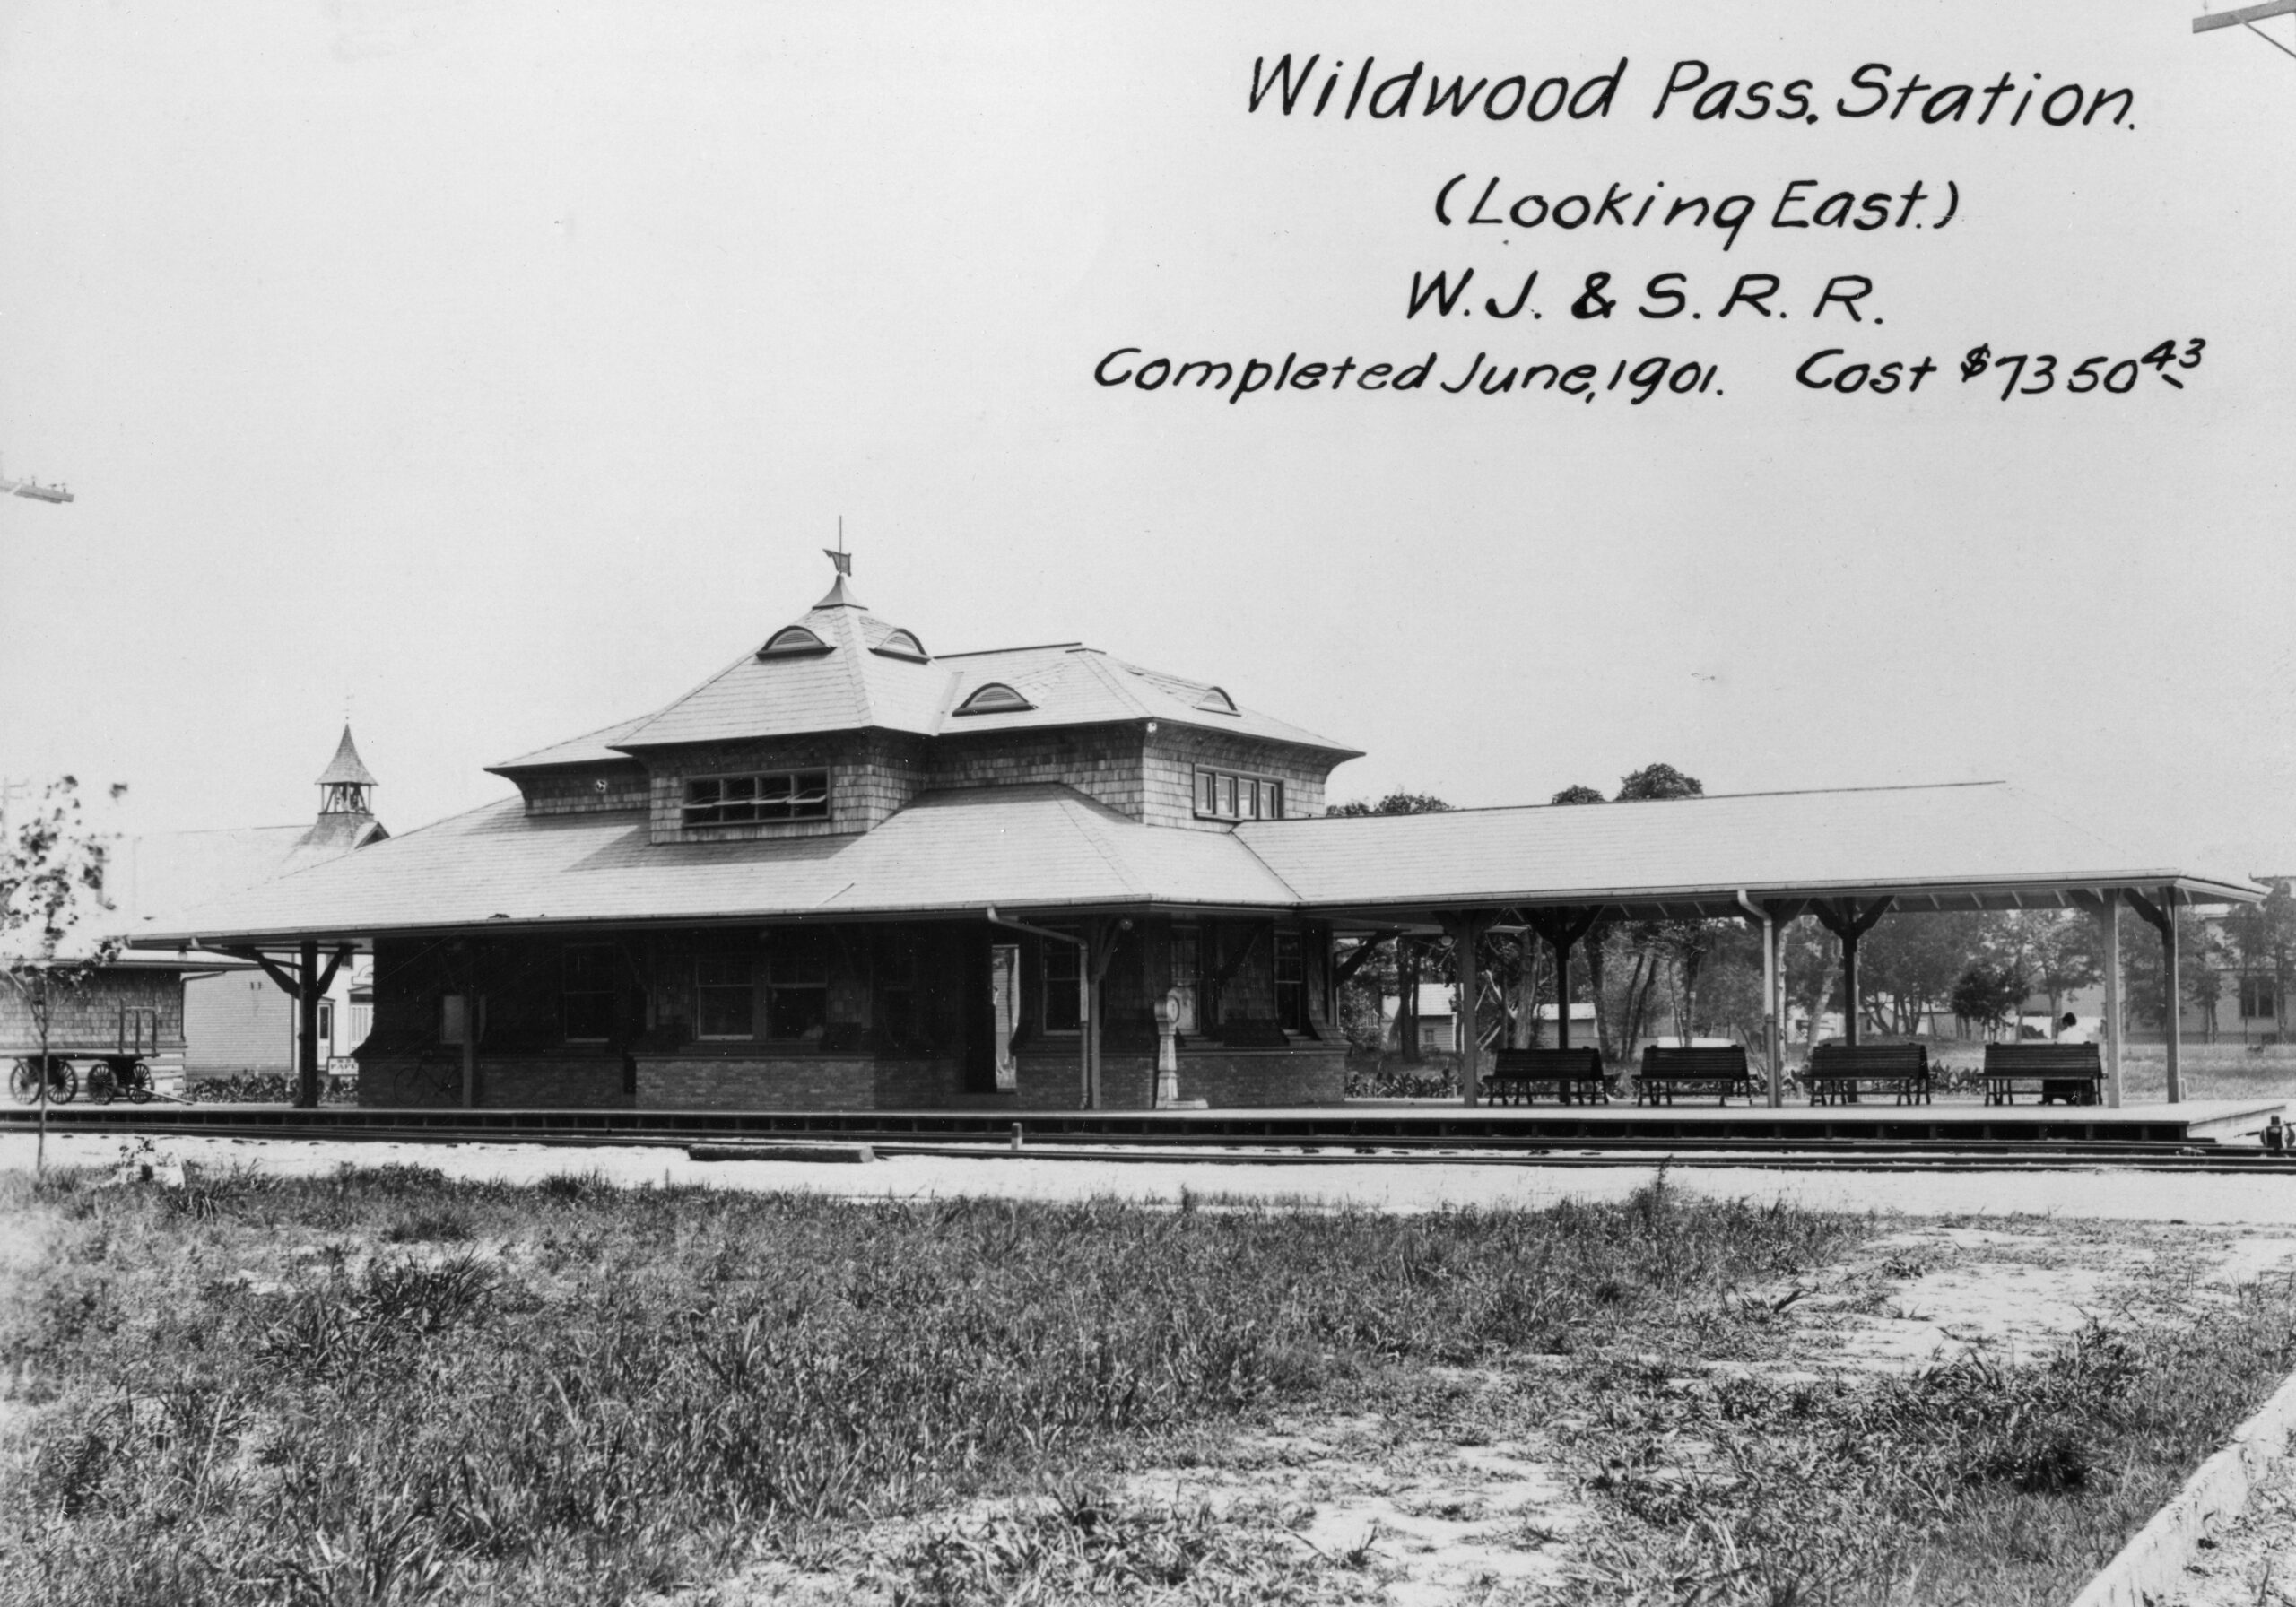 West Jersey and Seashore Railroad | PRSL | Wildwood, New Jersey | Passenger Station | 1901 | R.R. Long collection — West Jersey Chapter, NRHS